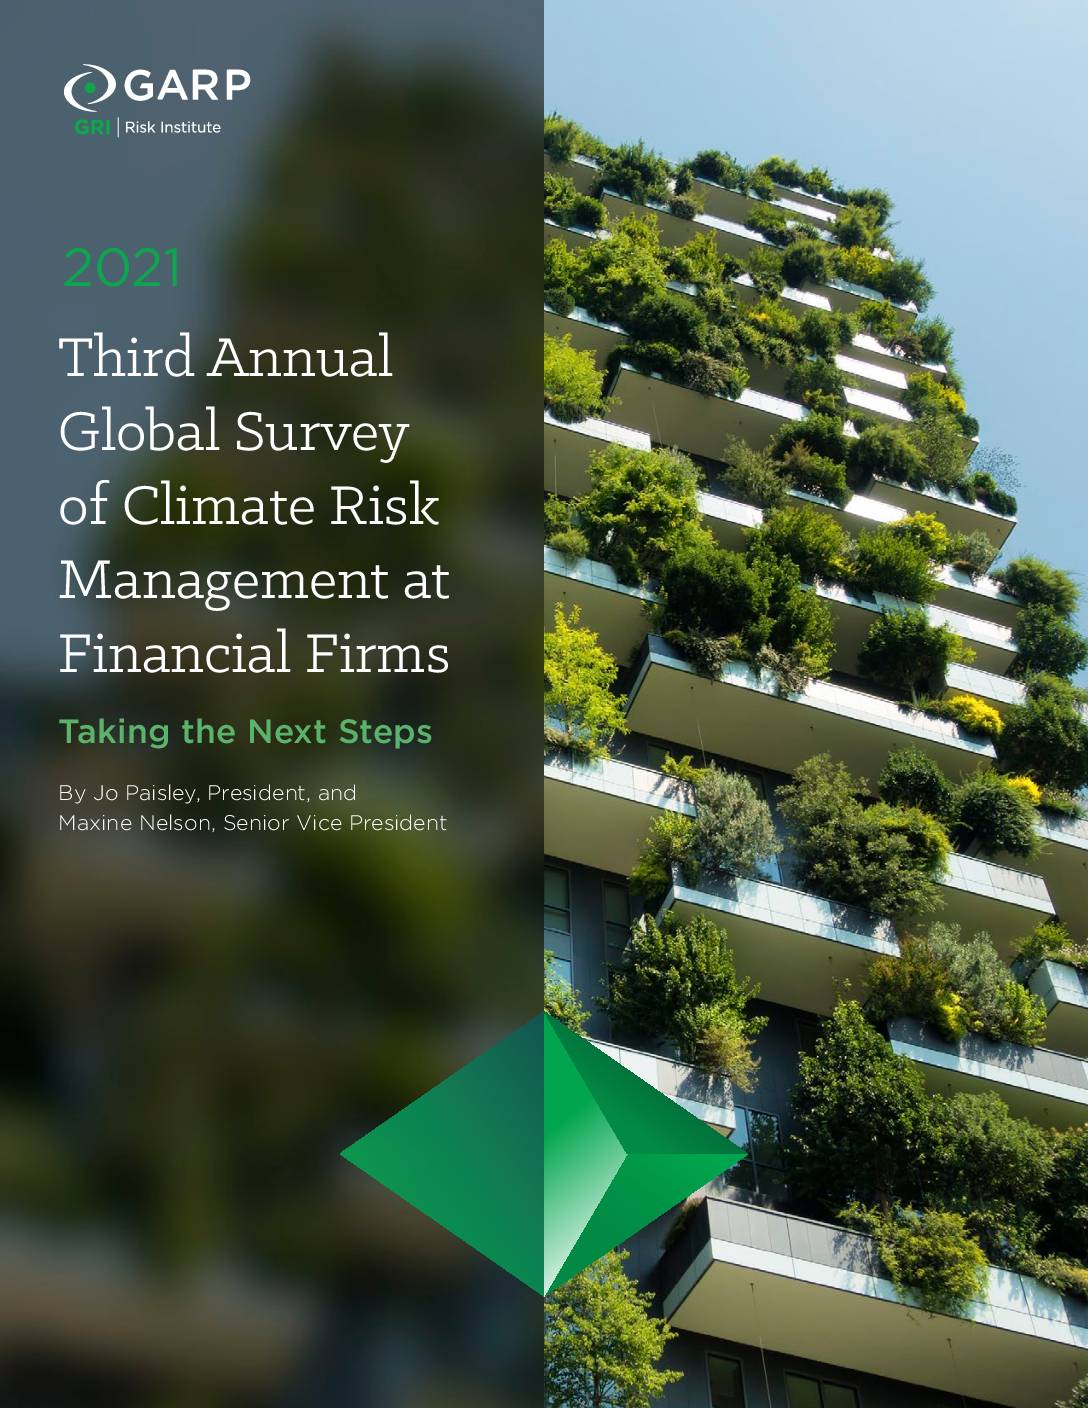 Third Annual Global Survey of Climate Risk Management at Financial Firms